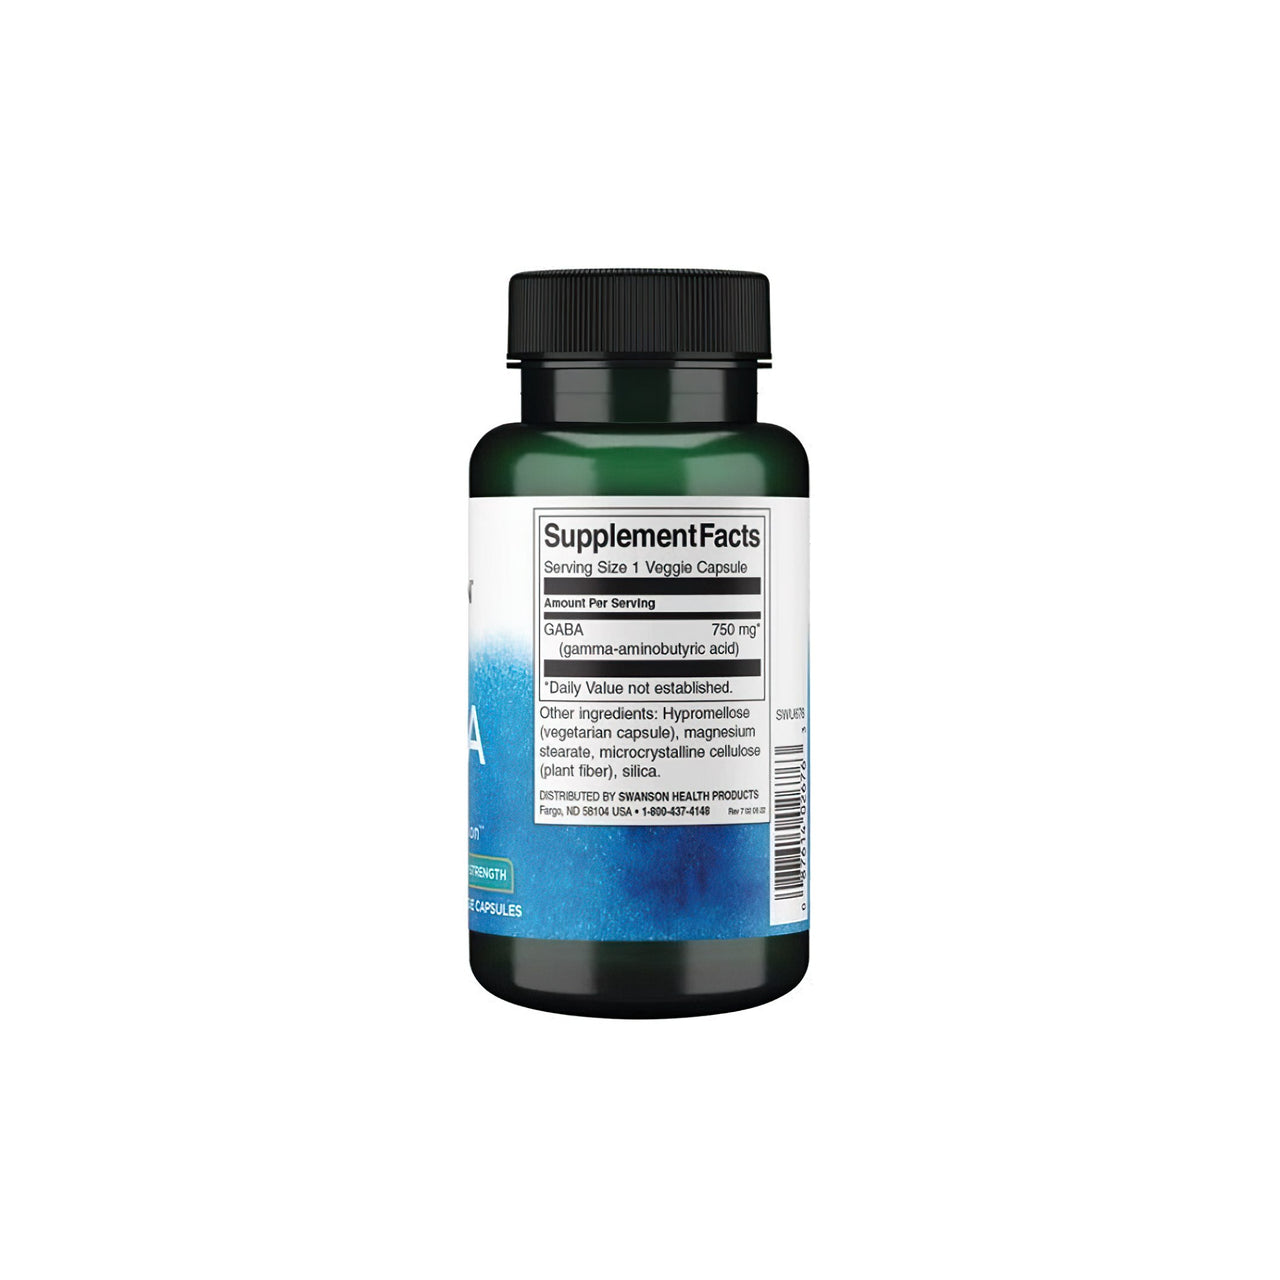 Bottle of Swanson GABA - 750 mg 60 Veggie Capsules with label displaying ingredients, supplement facts, and GABA for sleep and relaxation.